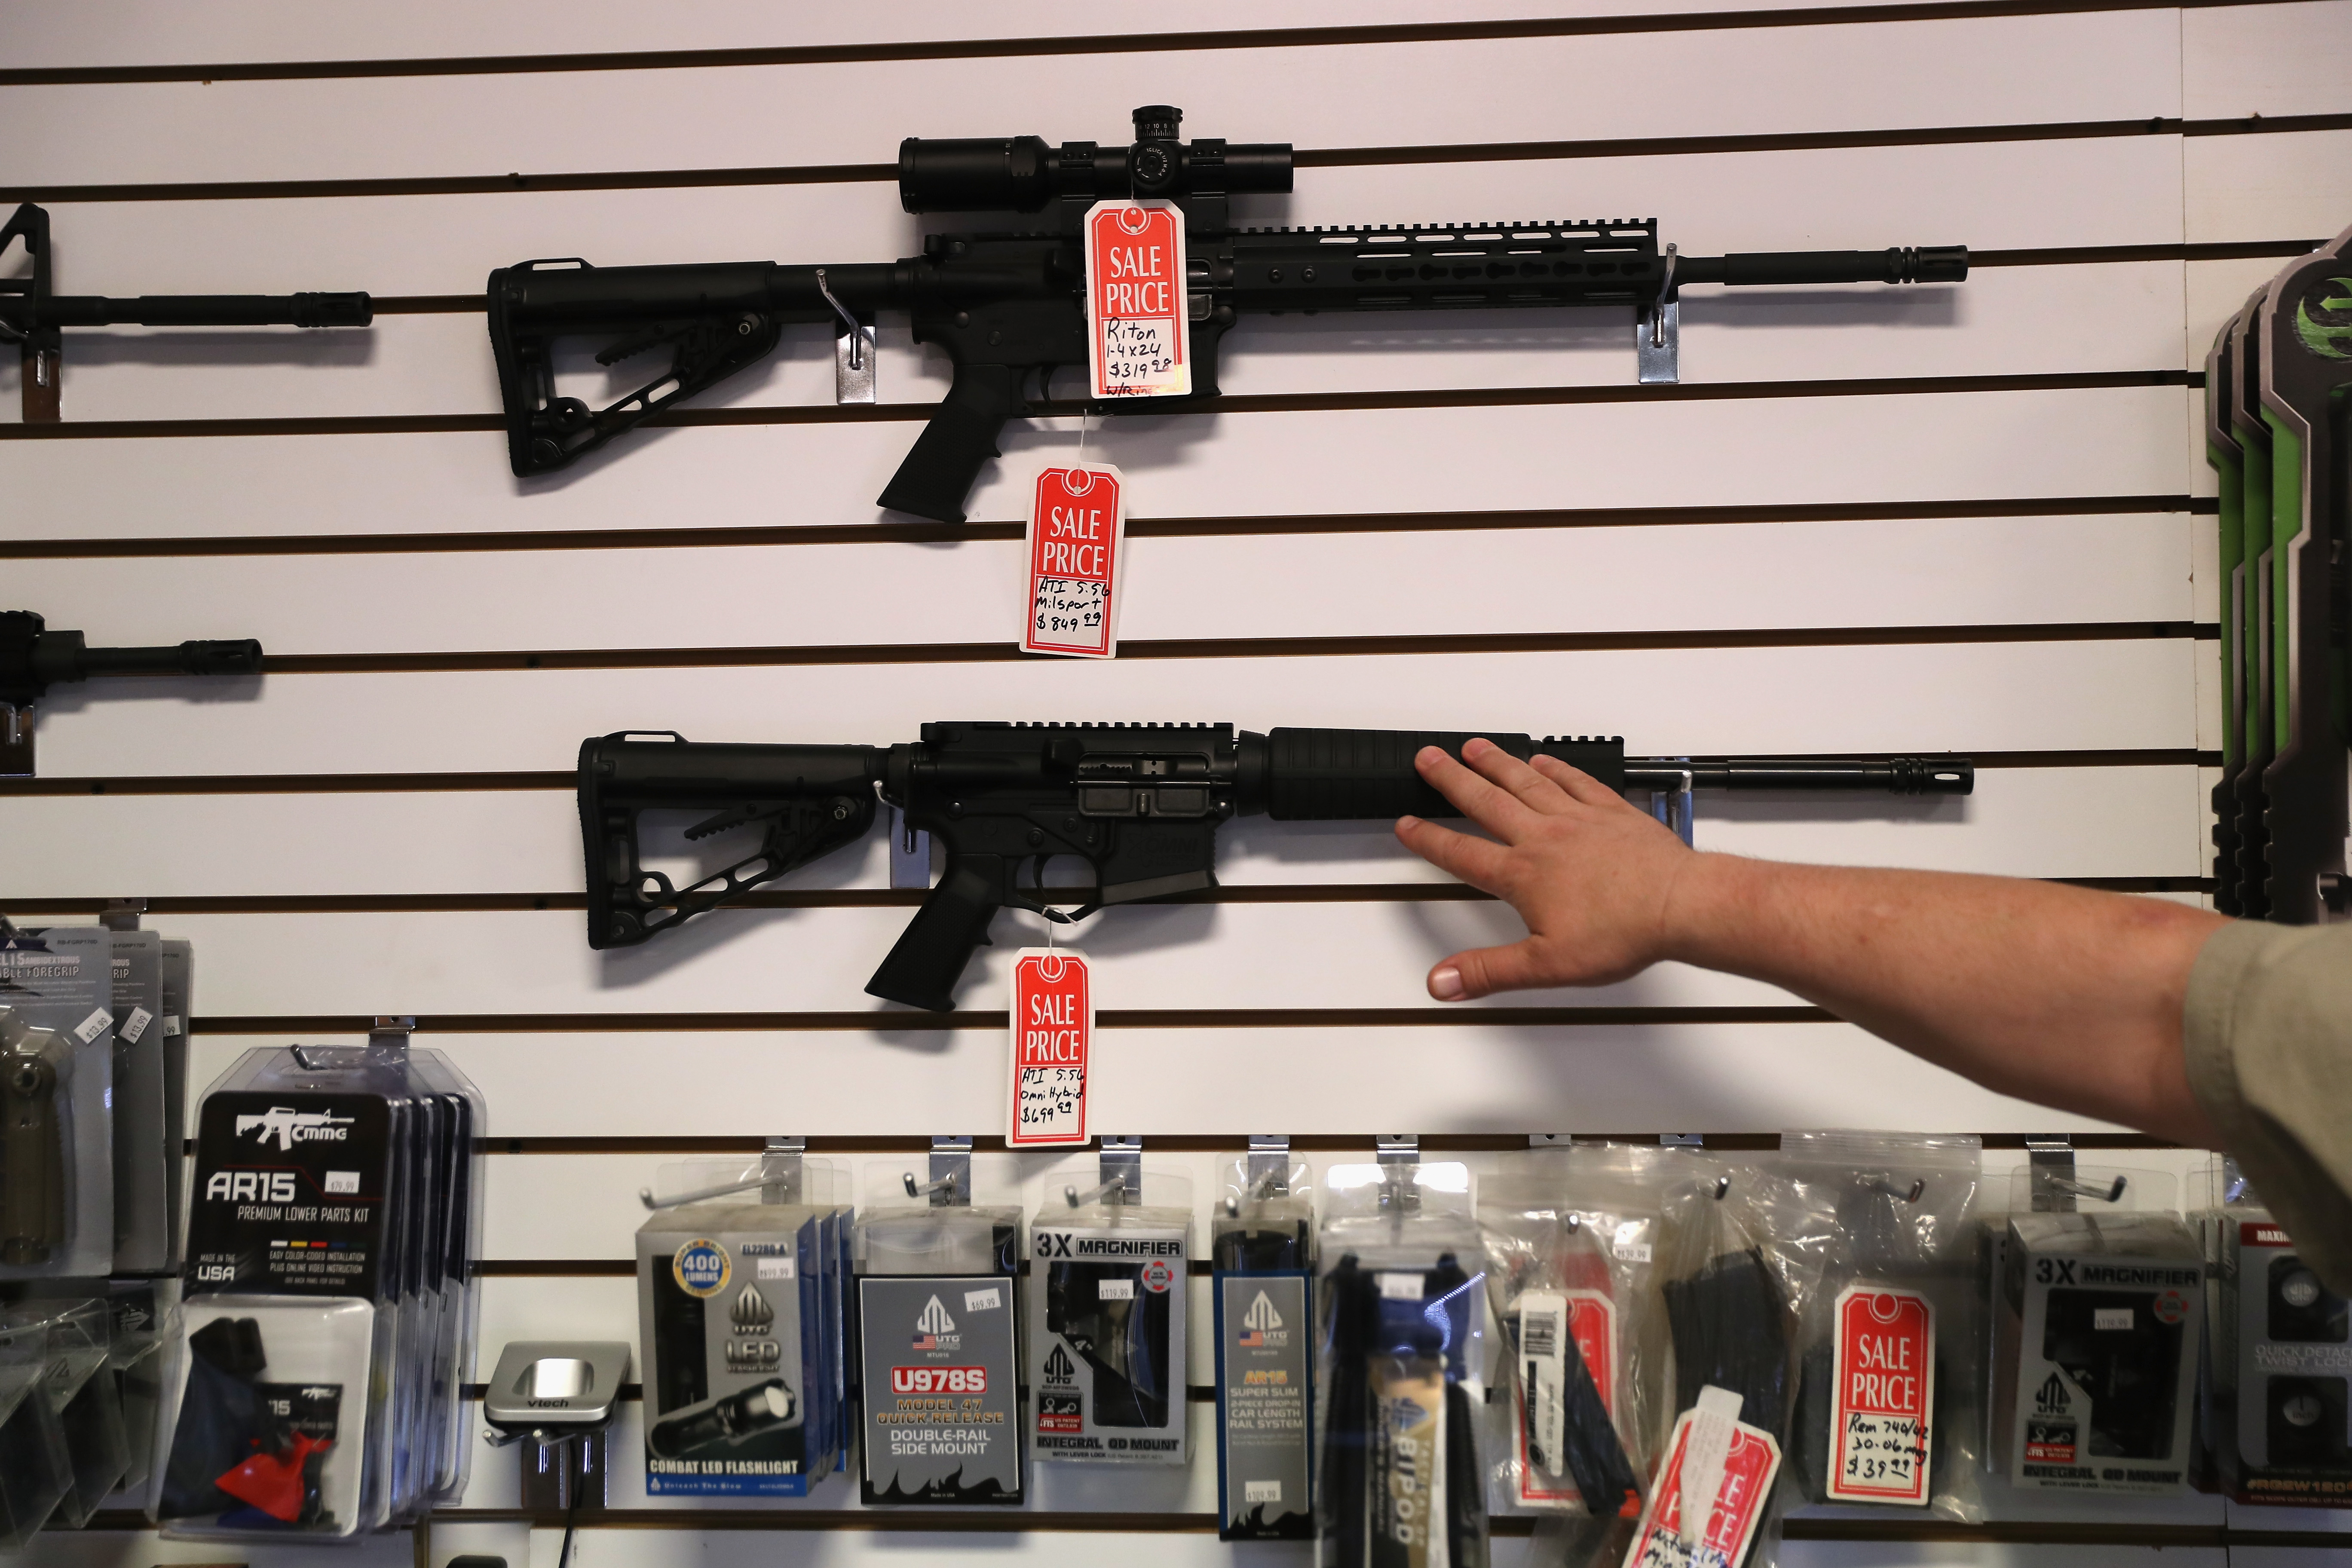 BENSON, AZ - SEPTEMBER 29: Gun shop owner Jeff Binkley displays AR-15 "Sport" rifles at Sarge's Sidearms on September 29, 2016 in Benson, Arizona. He said he redesigned and renamed his store just this year. Gun shops are proliferate in Arizona, which regulates and restricts weapons less than anywhere in the United States. (Photo by John Moore/Getty Images)